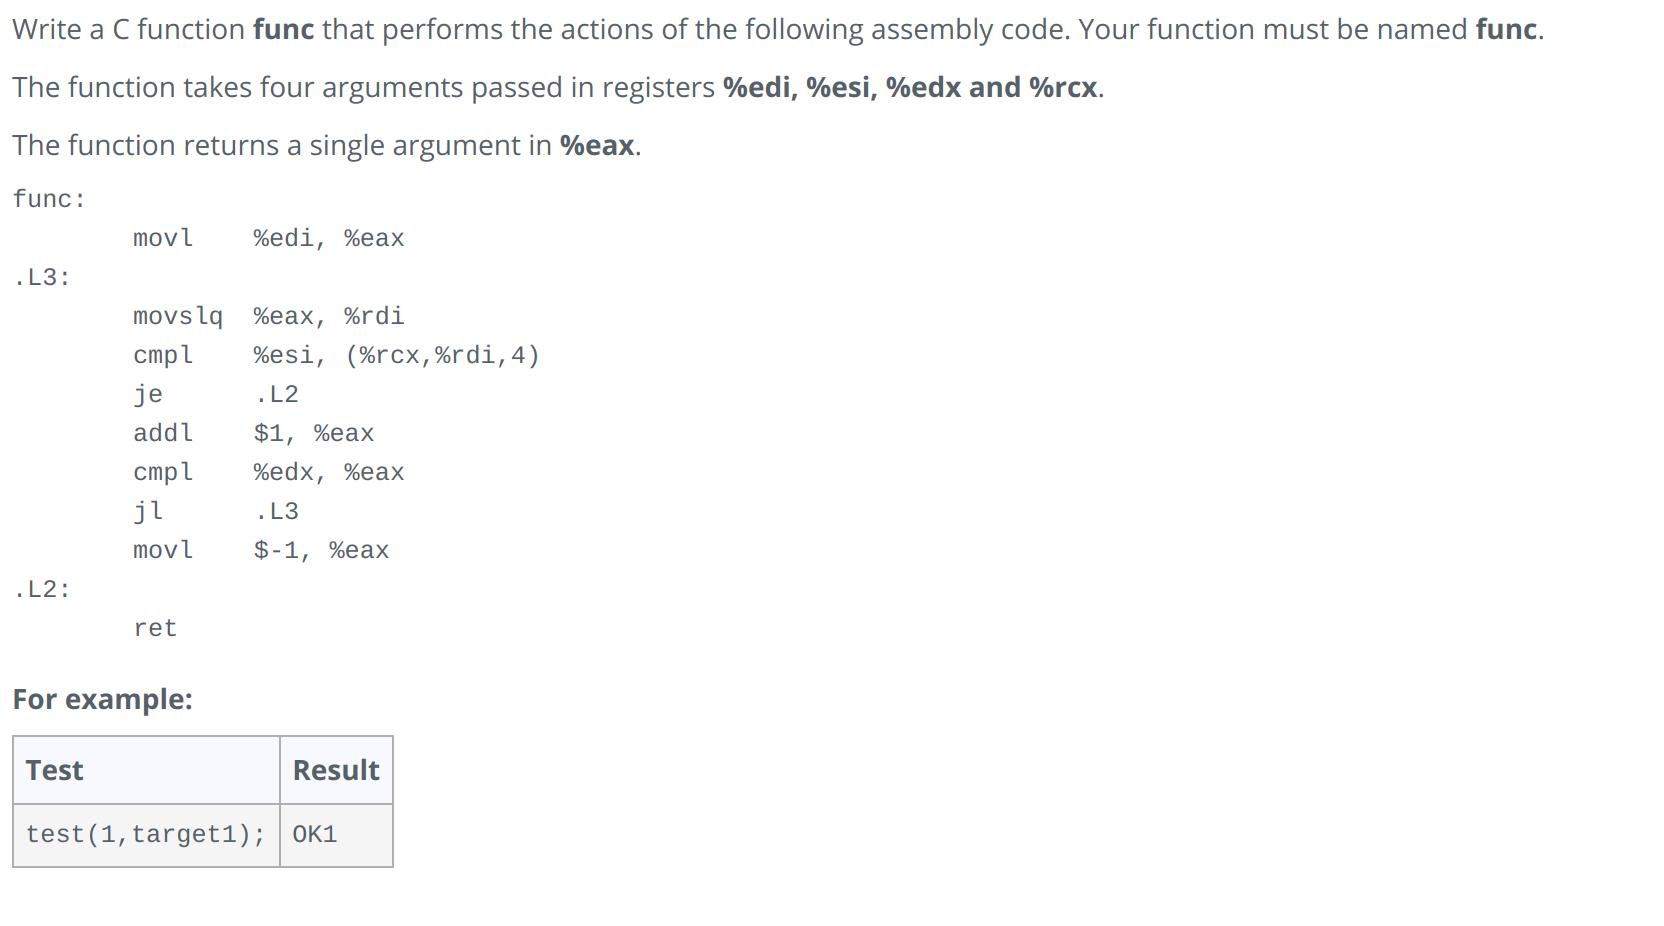 Write a C function func that performs the actions of the following assembly code. Your function must be named